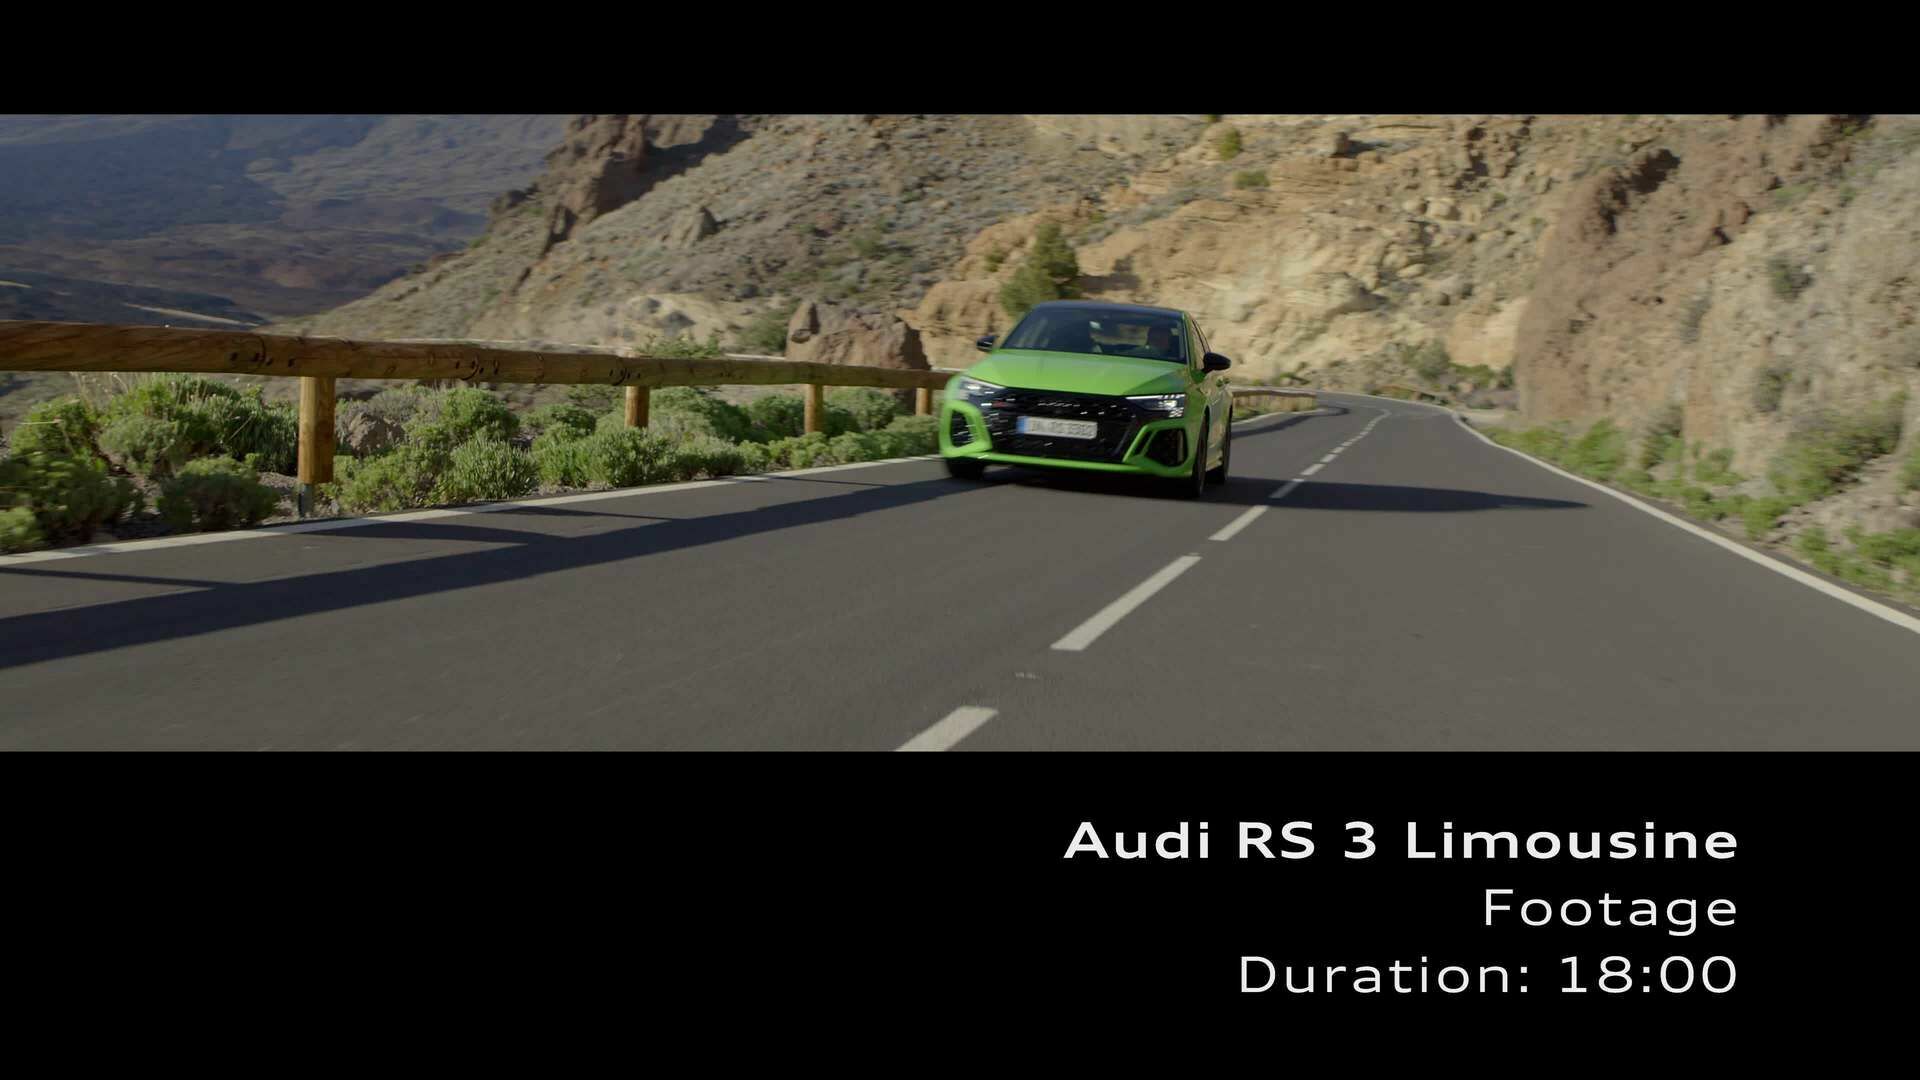 Footage: RS 3 Limousine on Location